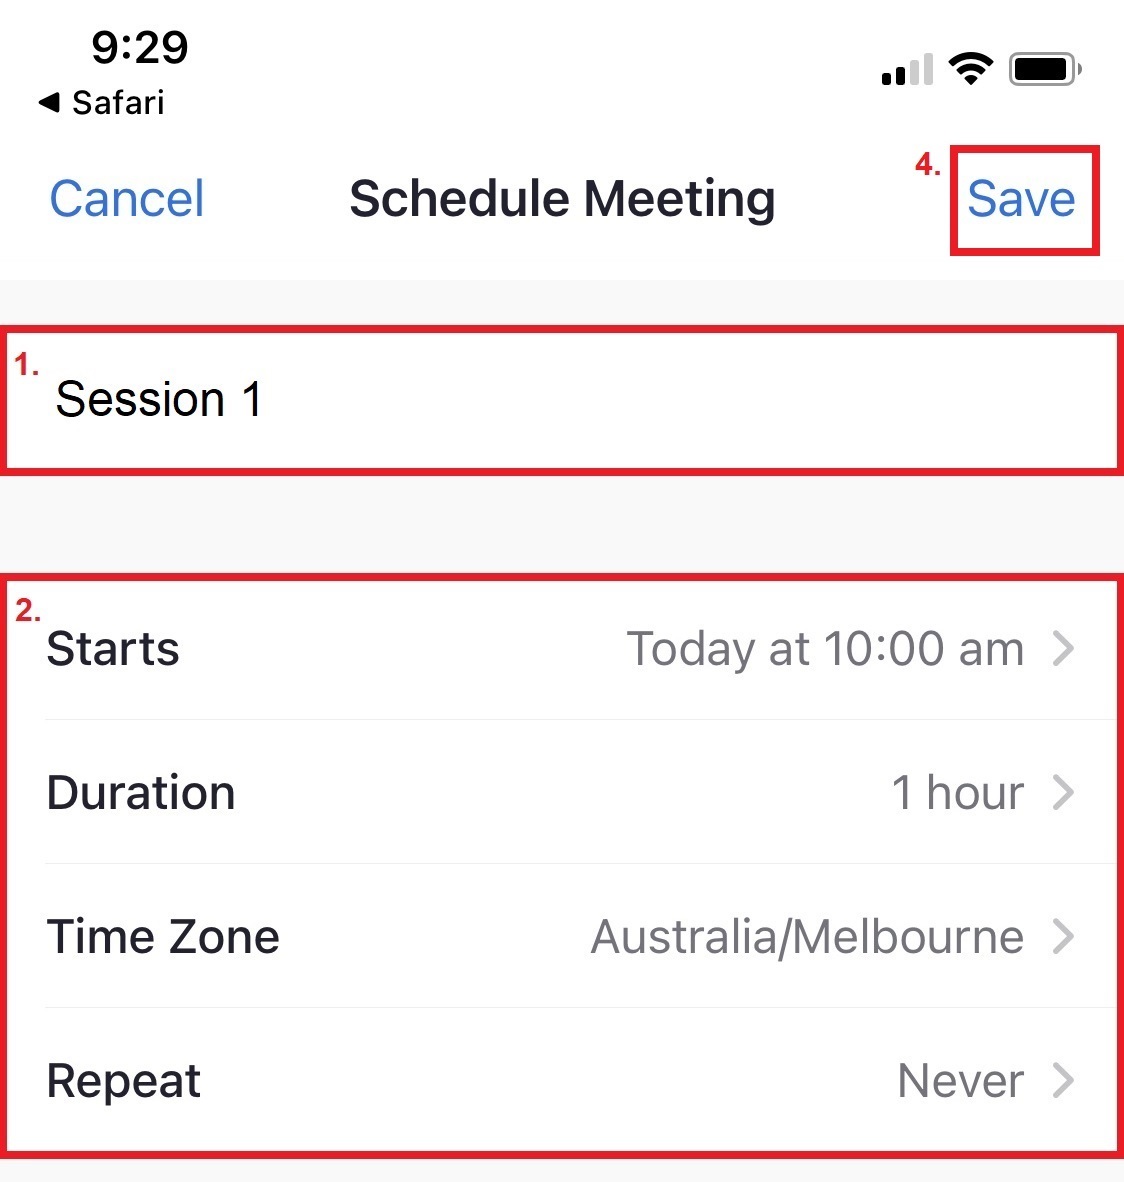 Schedule Meeting Settings available